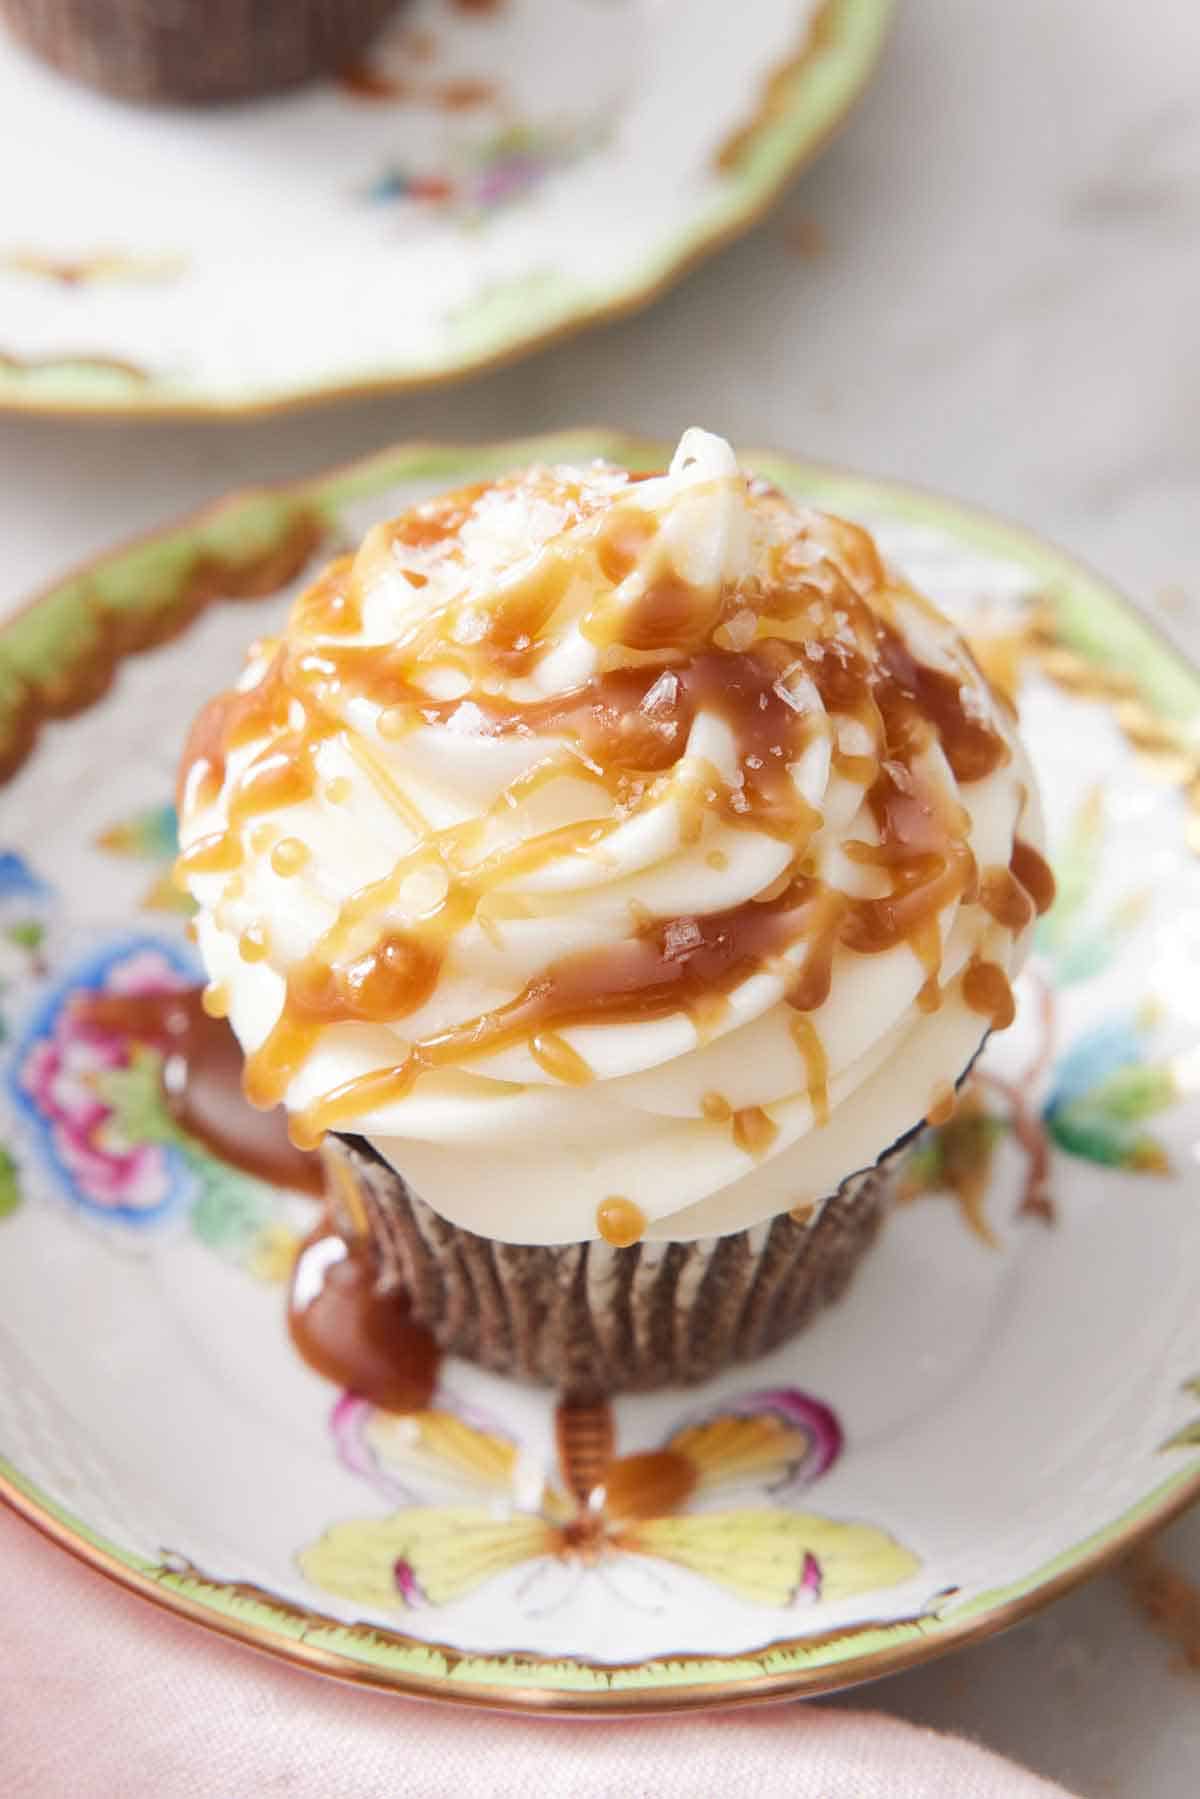 A cupcake with drizzled butterscotch over the frosting.